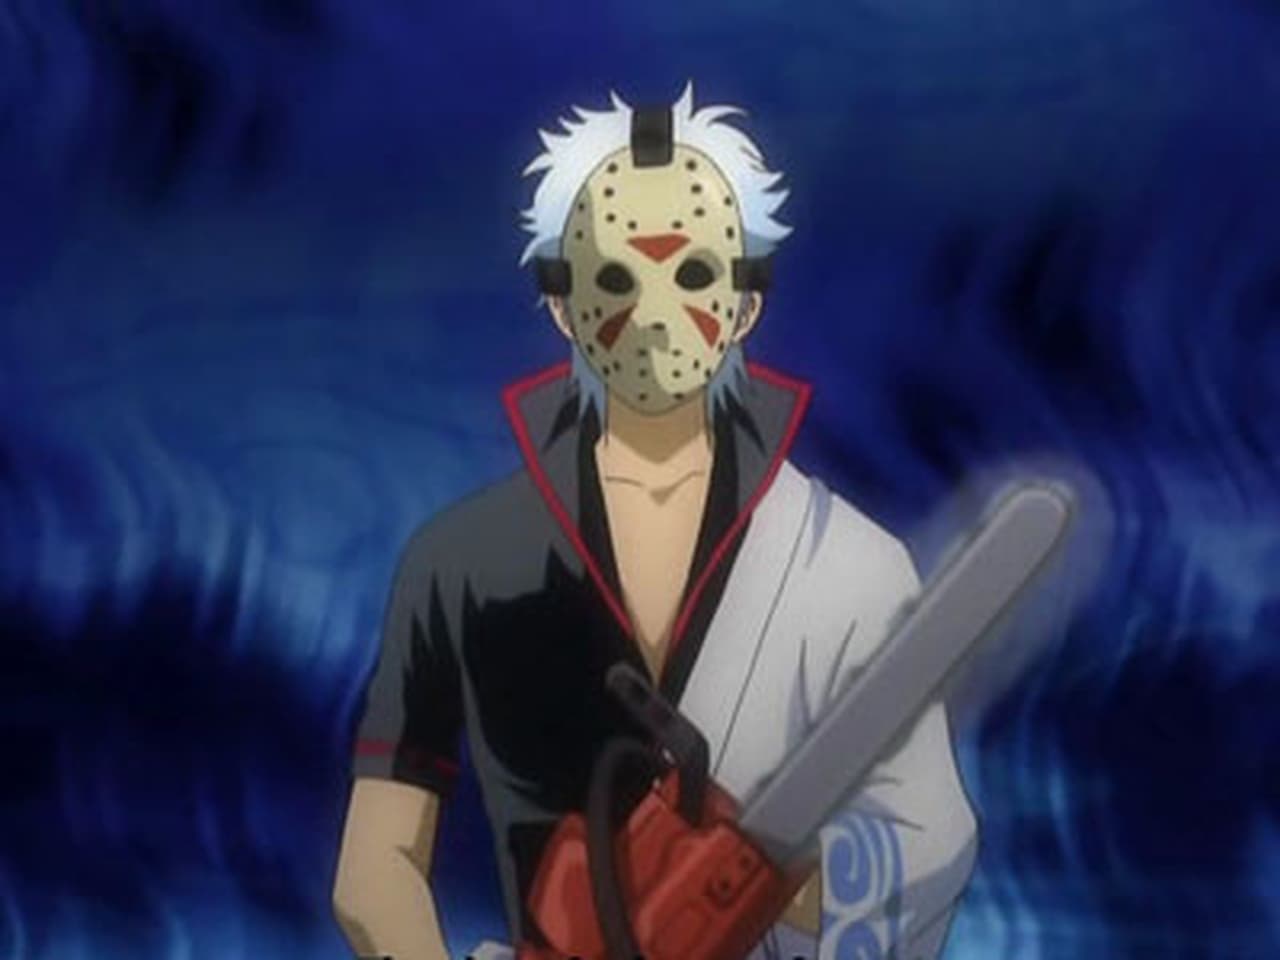 Gintama - Season 2 Episode 19 : Like a Haunted House, Life is Filled with Horrors